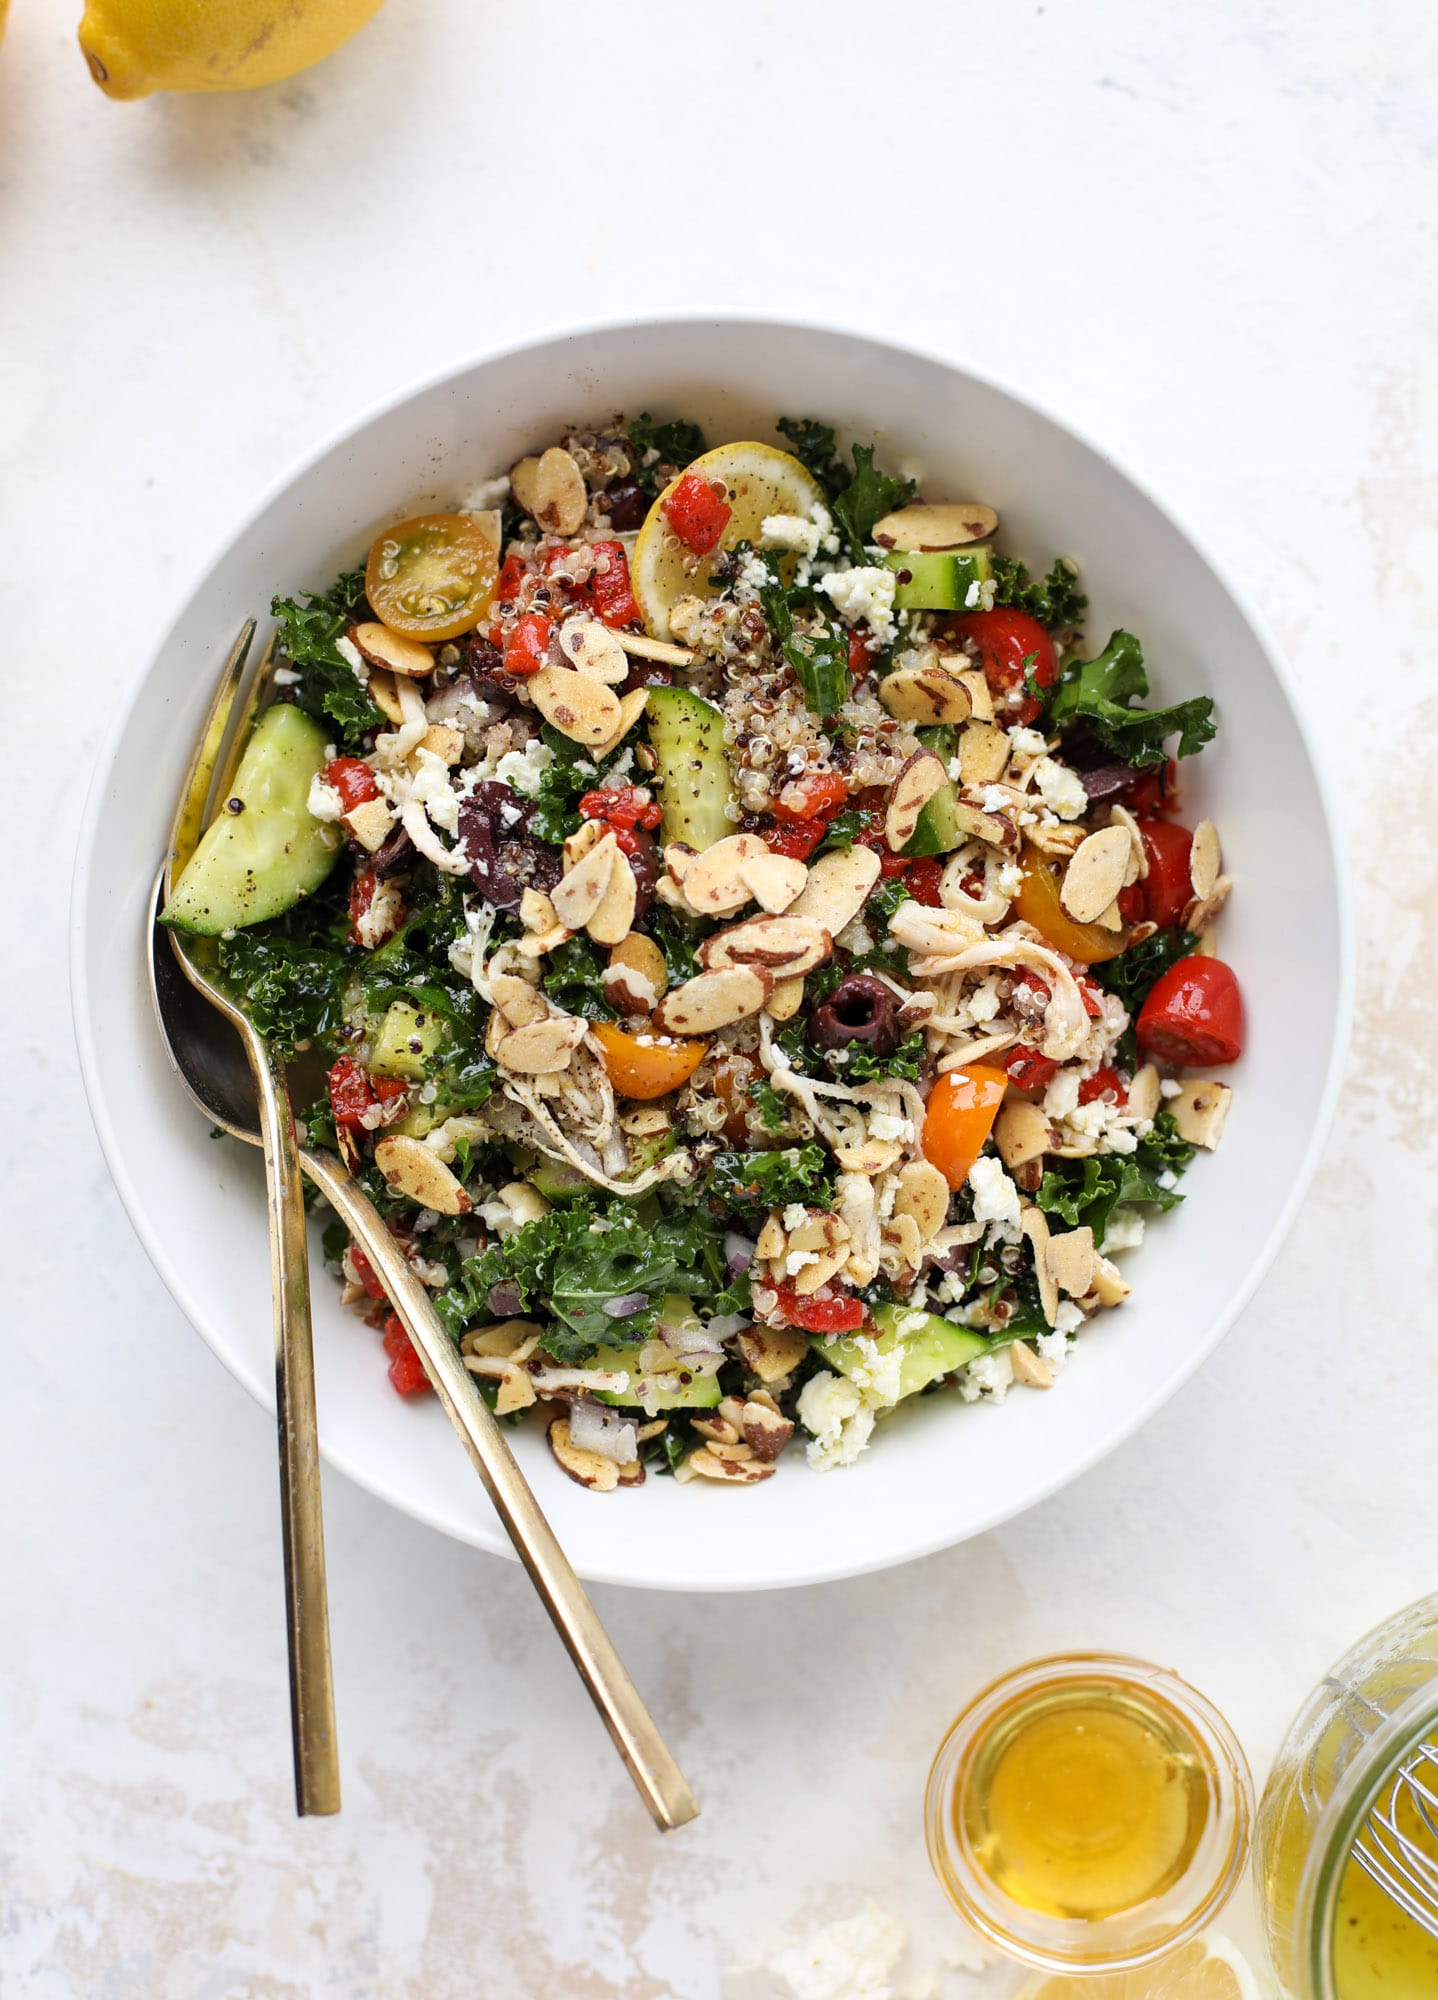 This mediterranean kale and quinoa salad is a copycat for the delicious Panera Bread Modern Greek Salad with Chicken. Super easy and satisfying! I howsweeteats.com #mediterranean #kalesalad